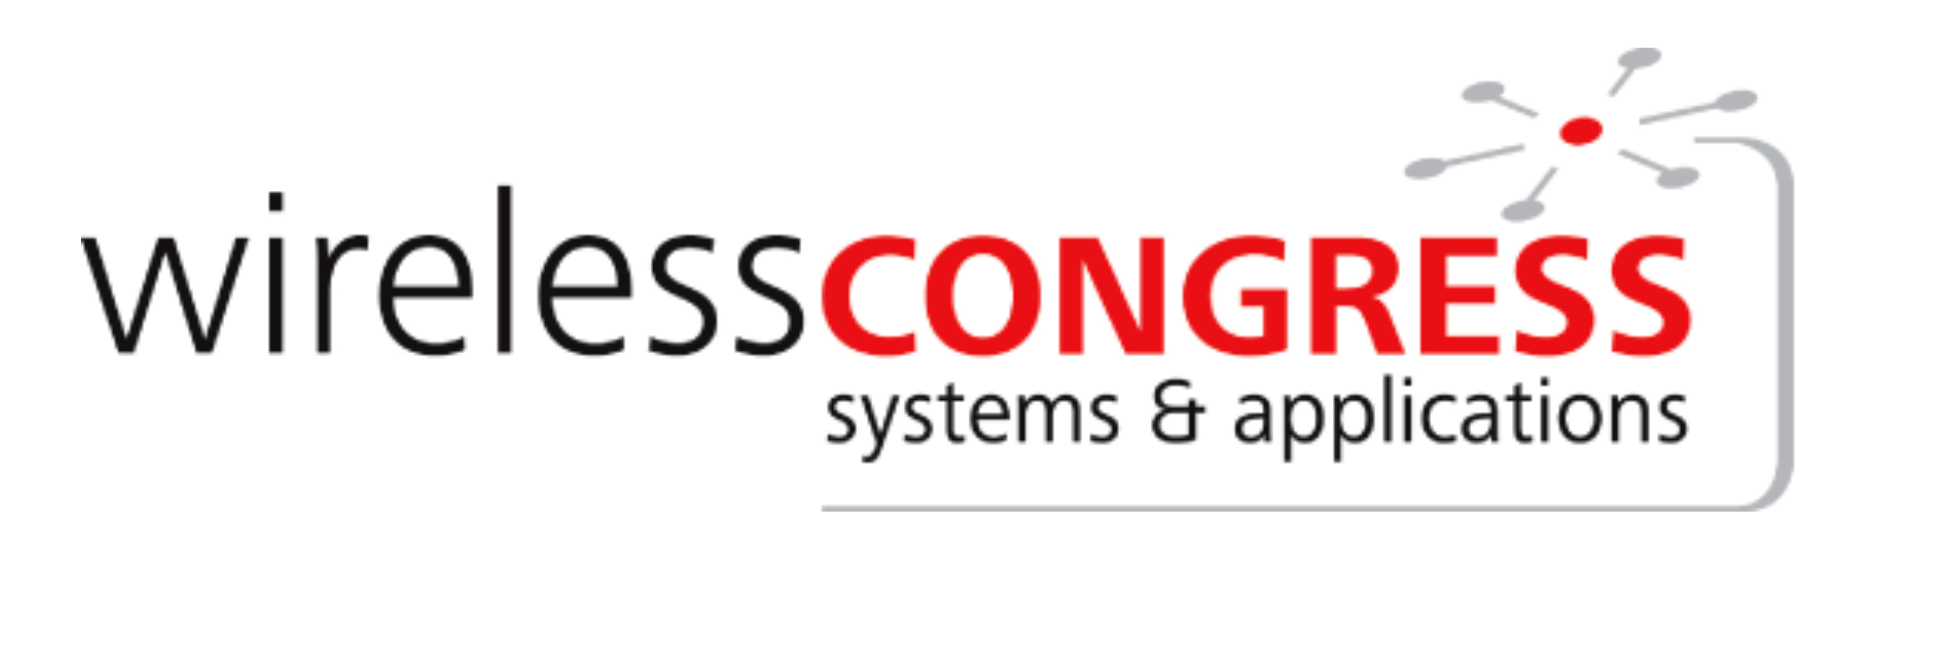 logo of wireless congress systems & applications